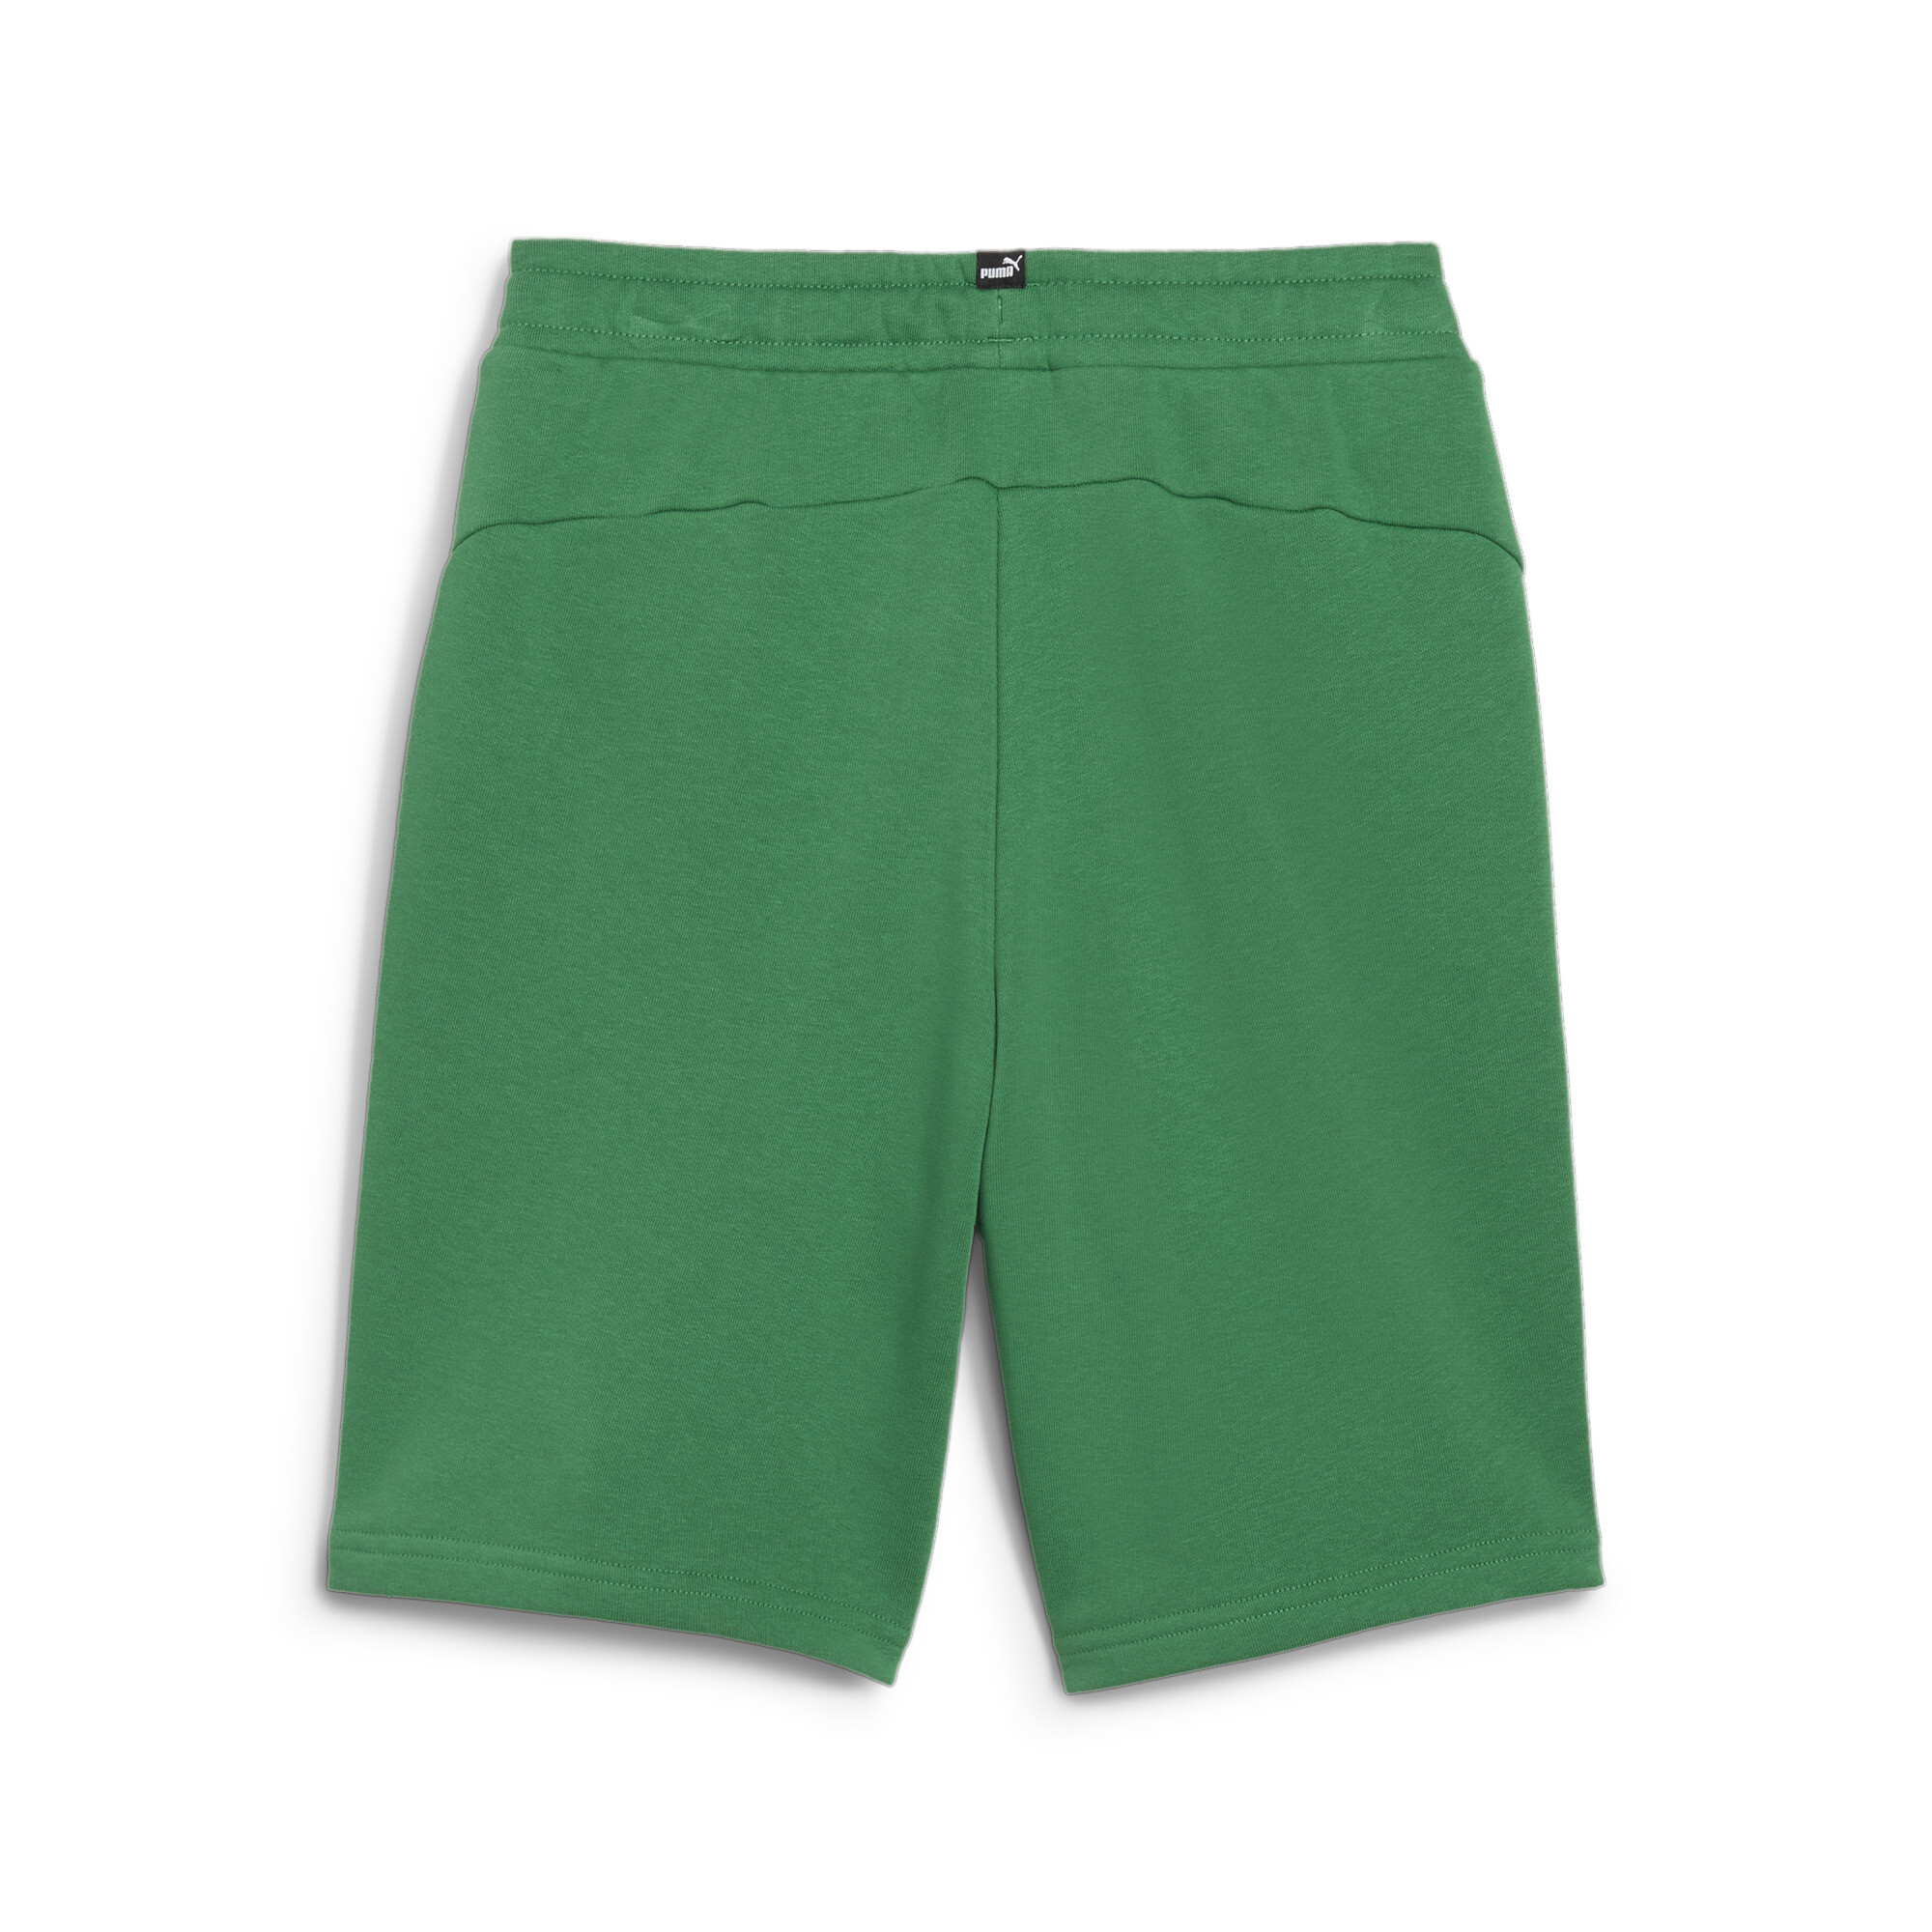 PUMA Essentials+ Two-Tone Shorts In Green, Size 7-8 Youth